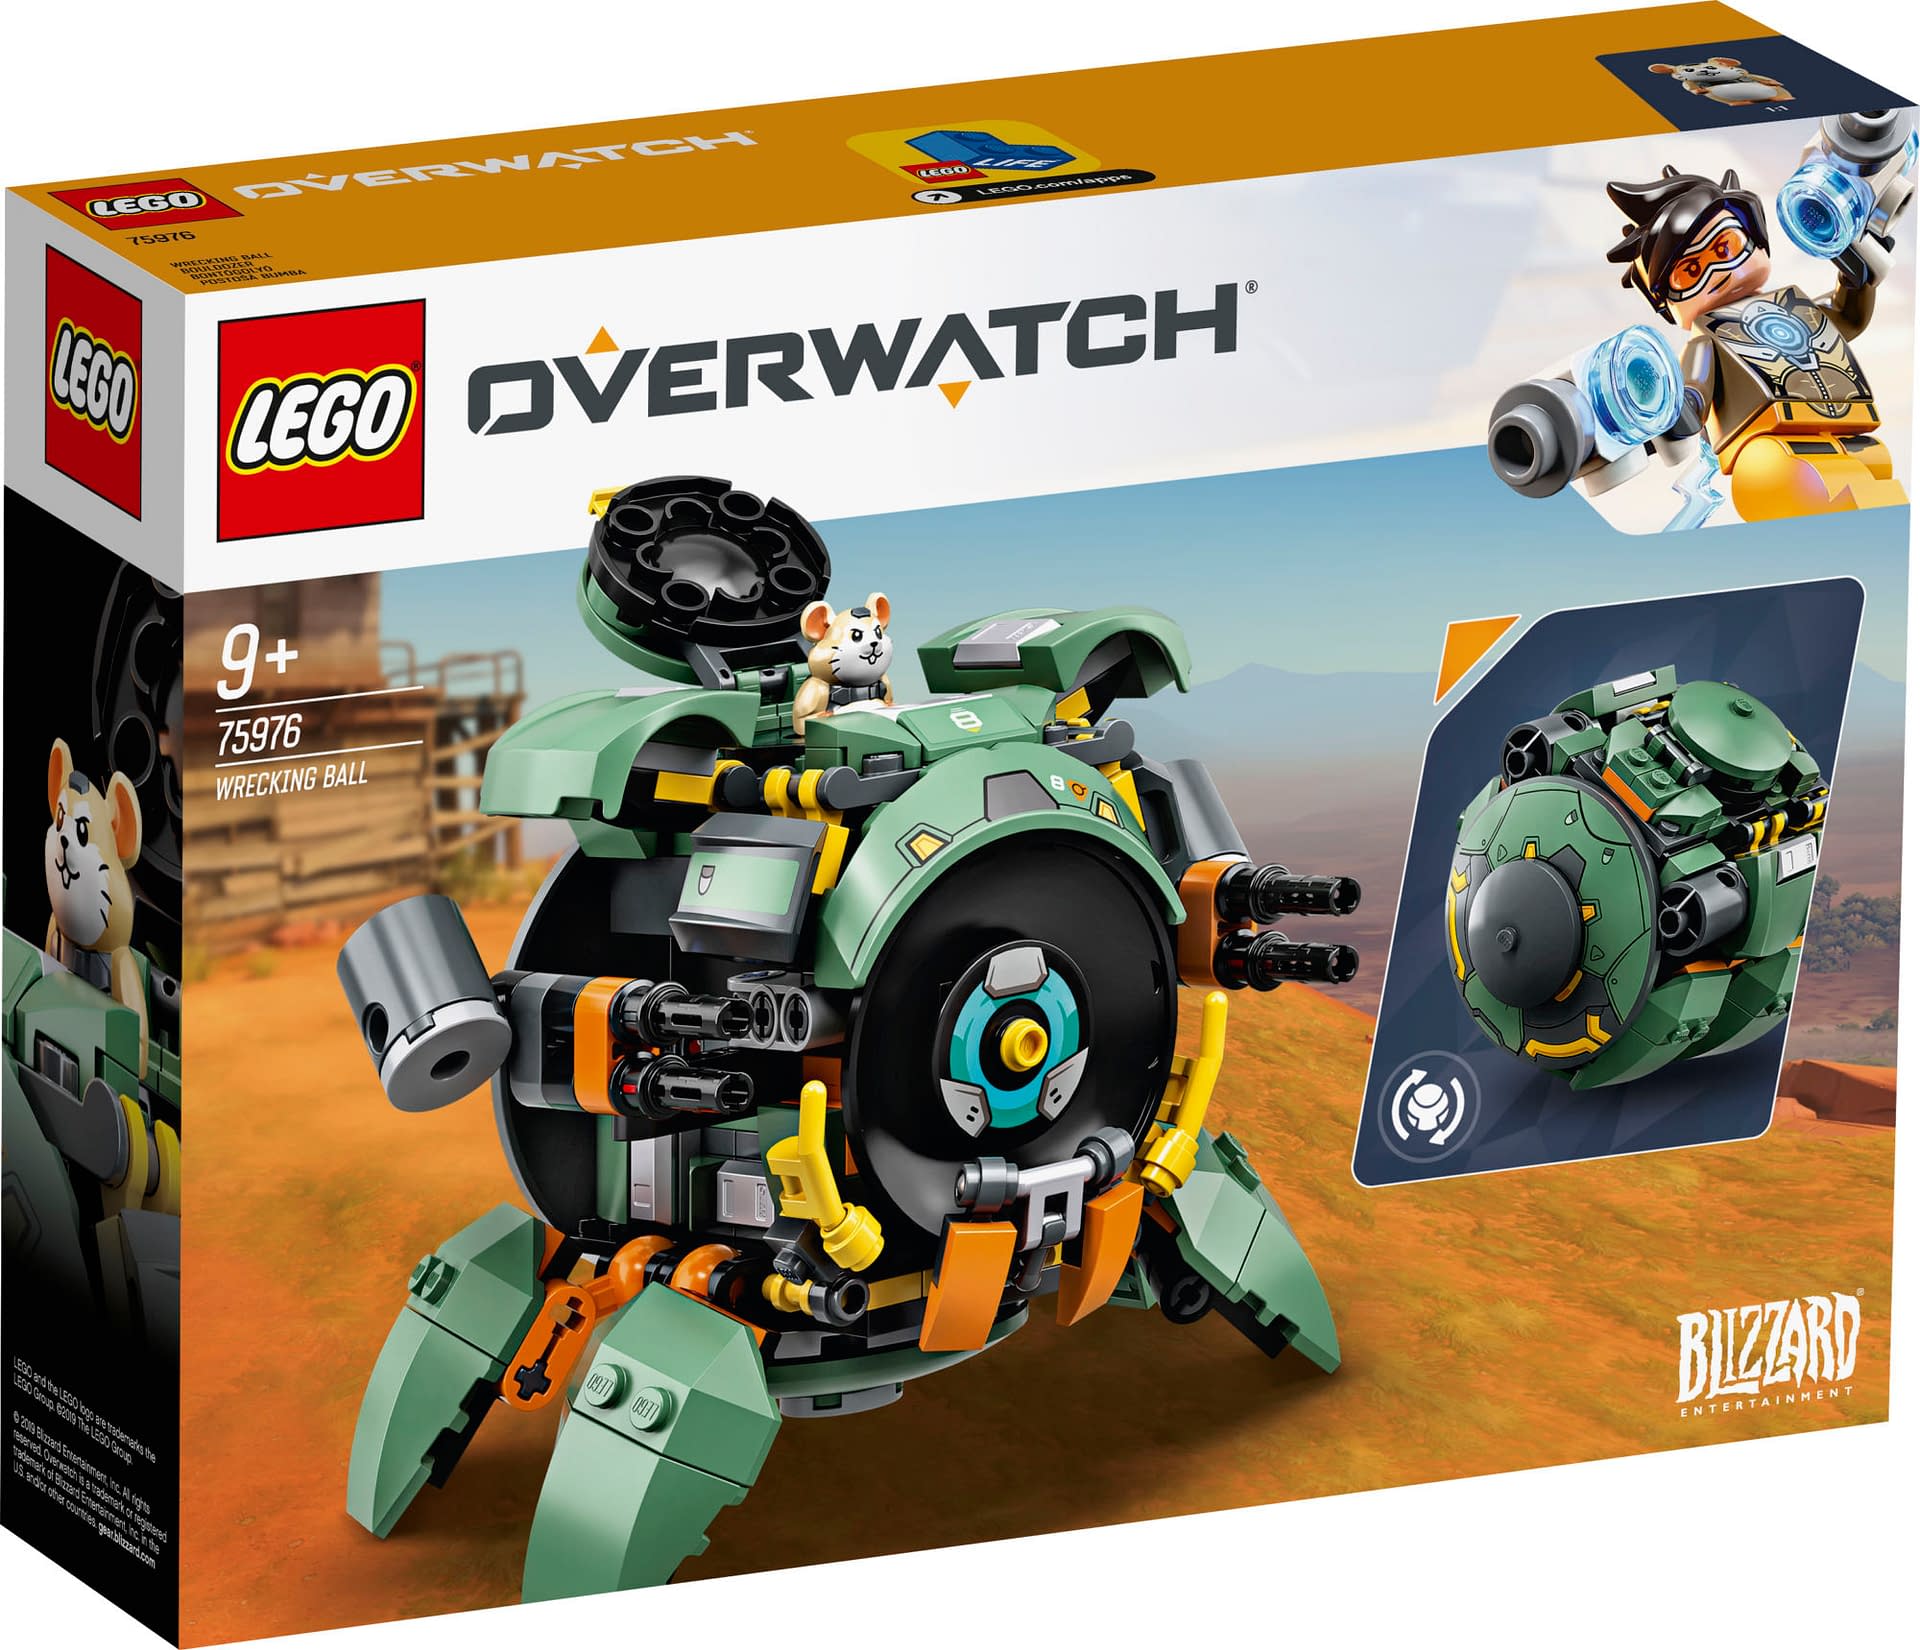 New Overwatch Collectibles Incoming with LEGO and NERF!